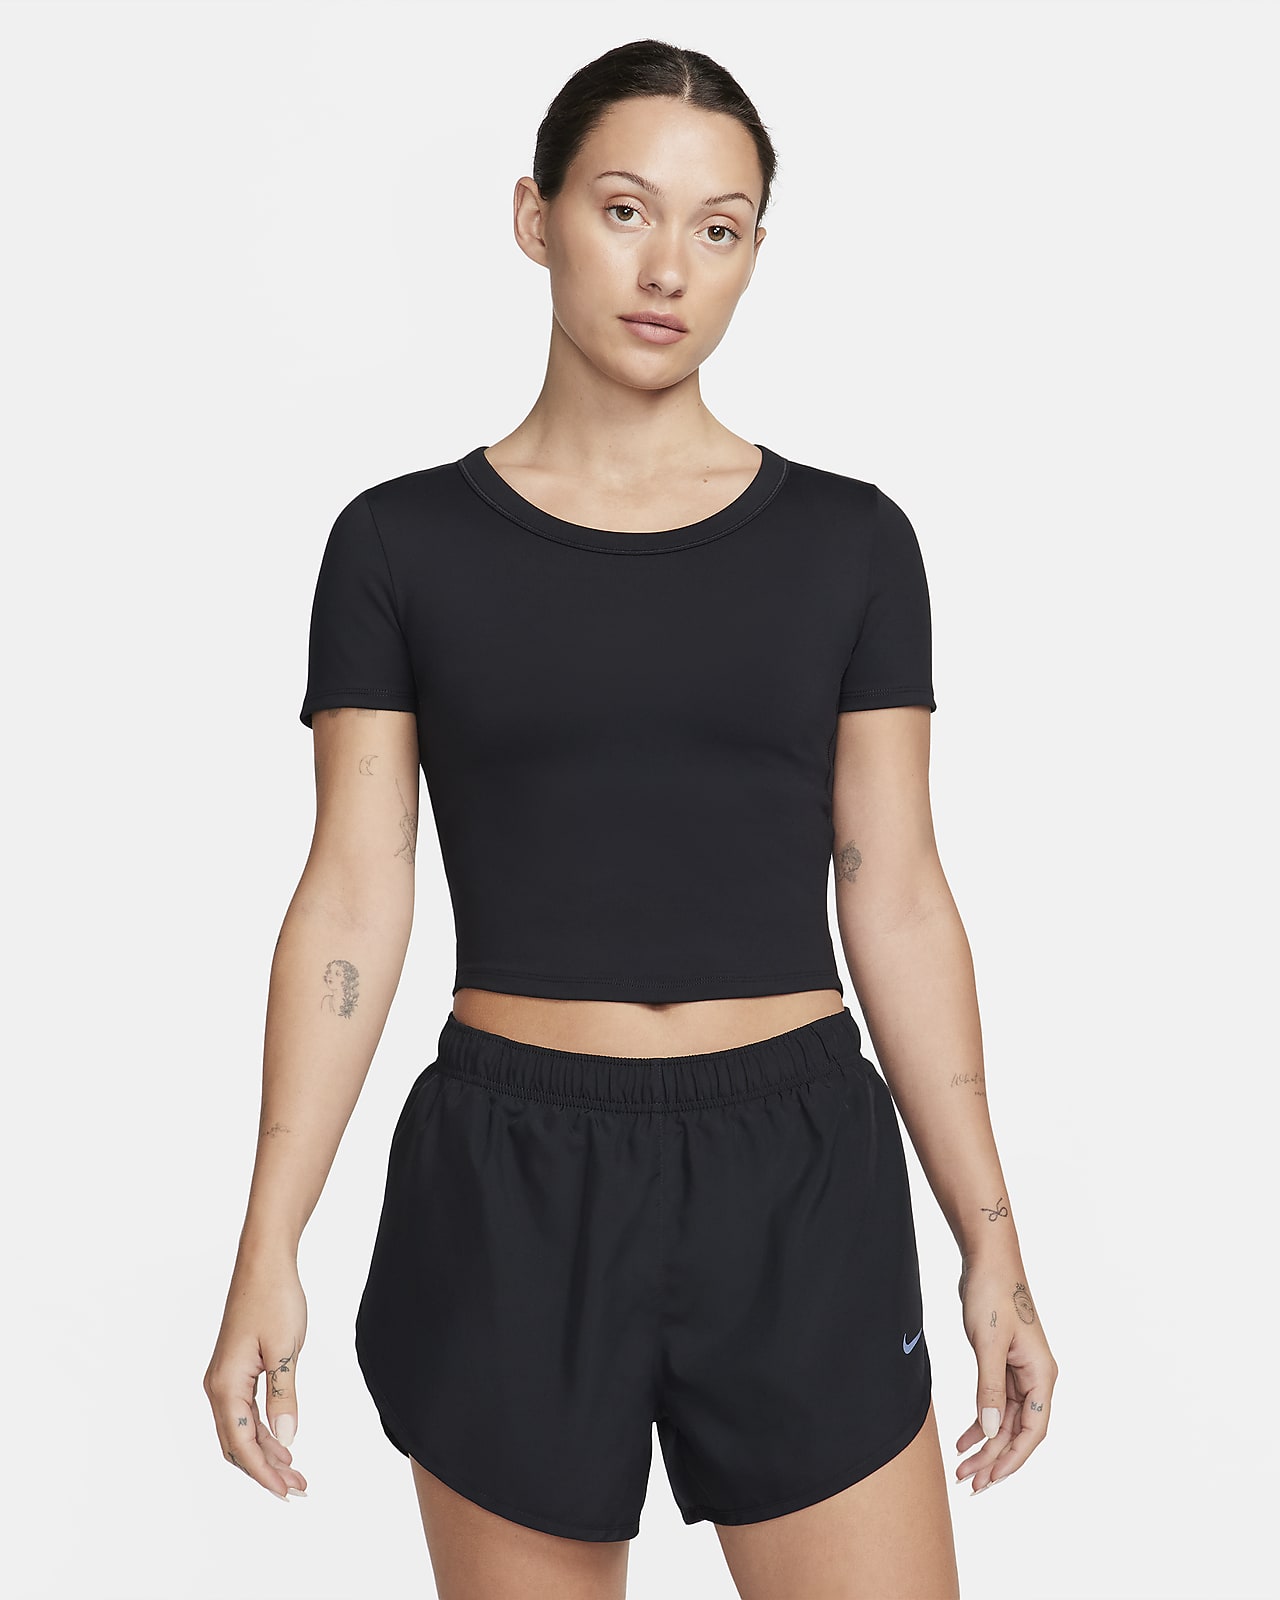 Crop top Dri-FIT à manches courtes Nike One Fitted pour femme